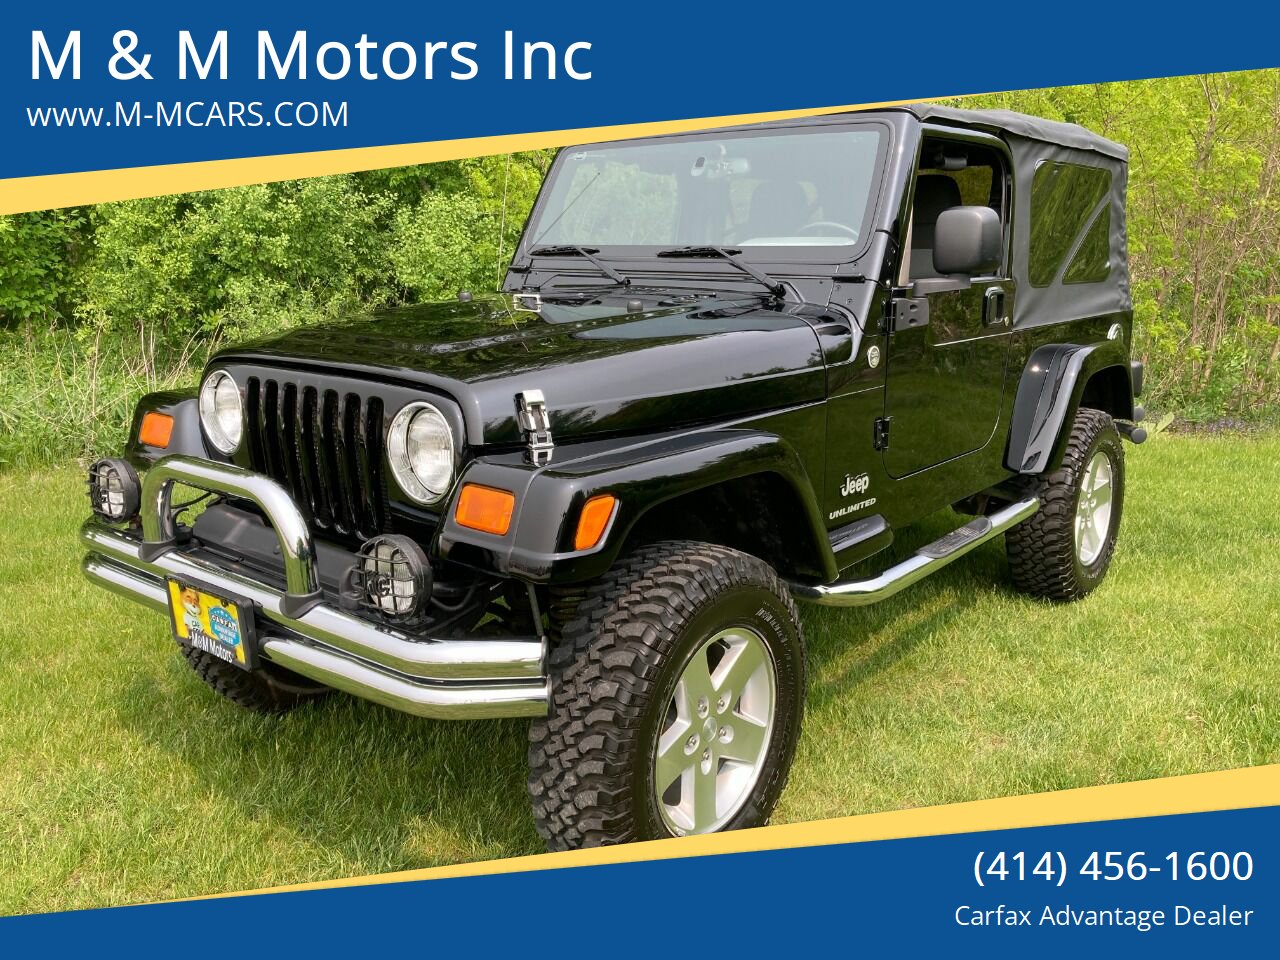 2004 to 2006 Jeep Wrangler For Sale from $499 to $3,980,000